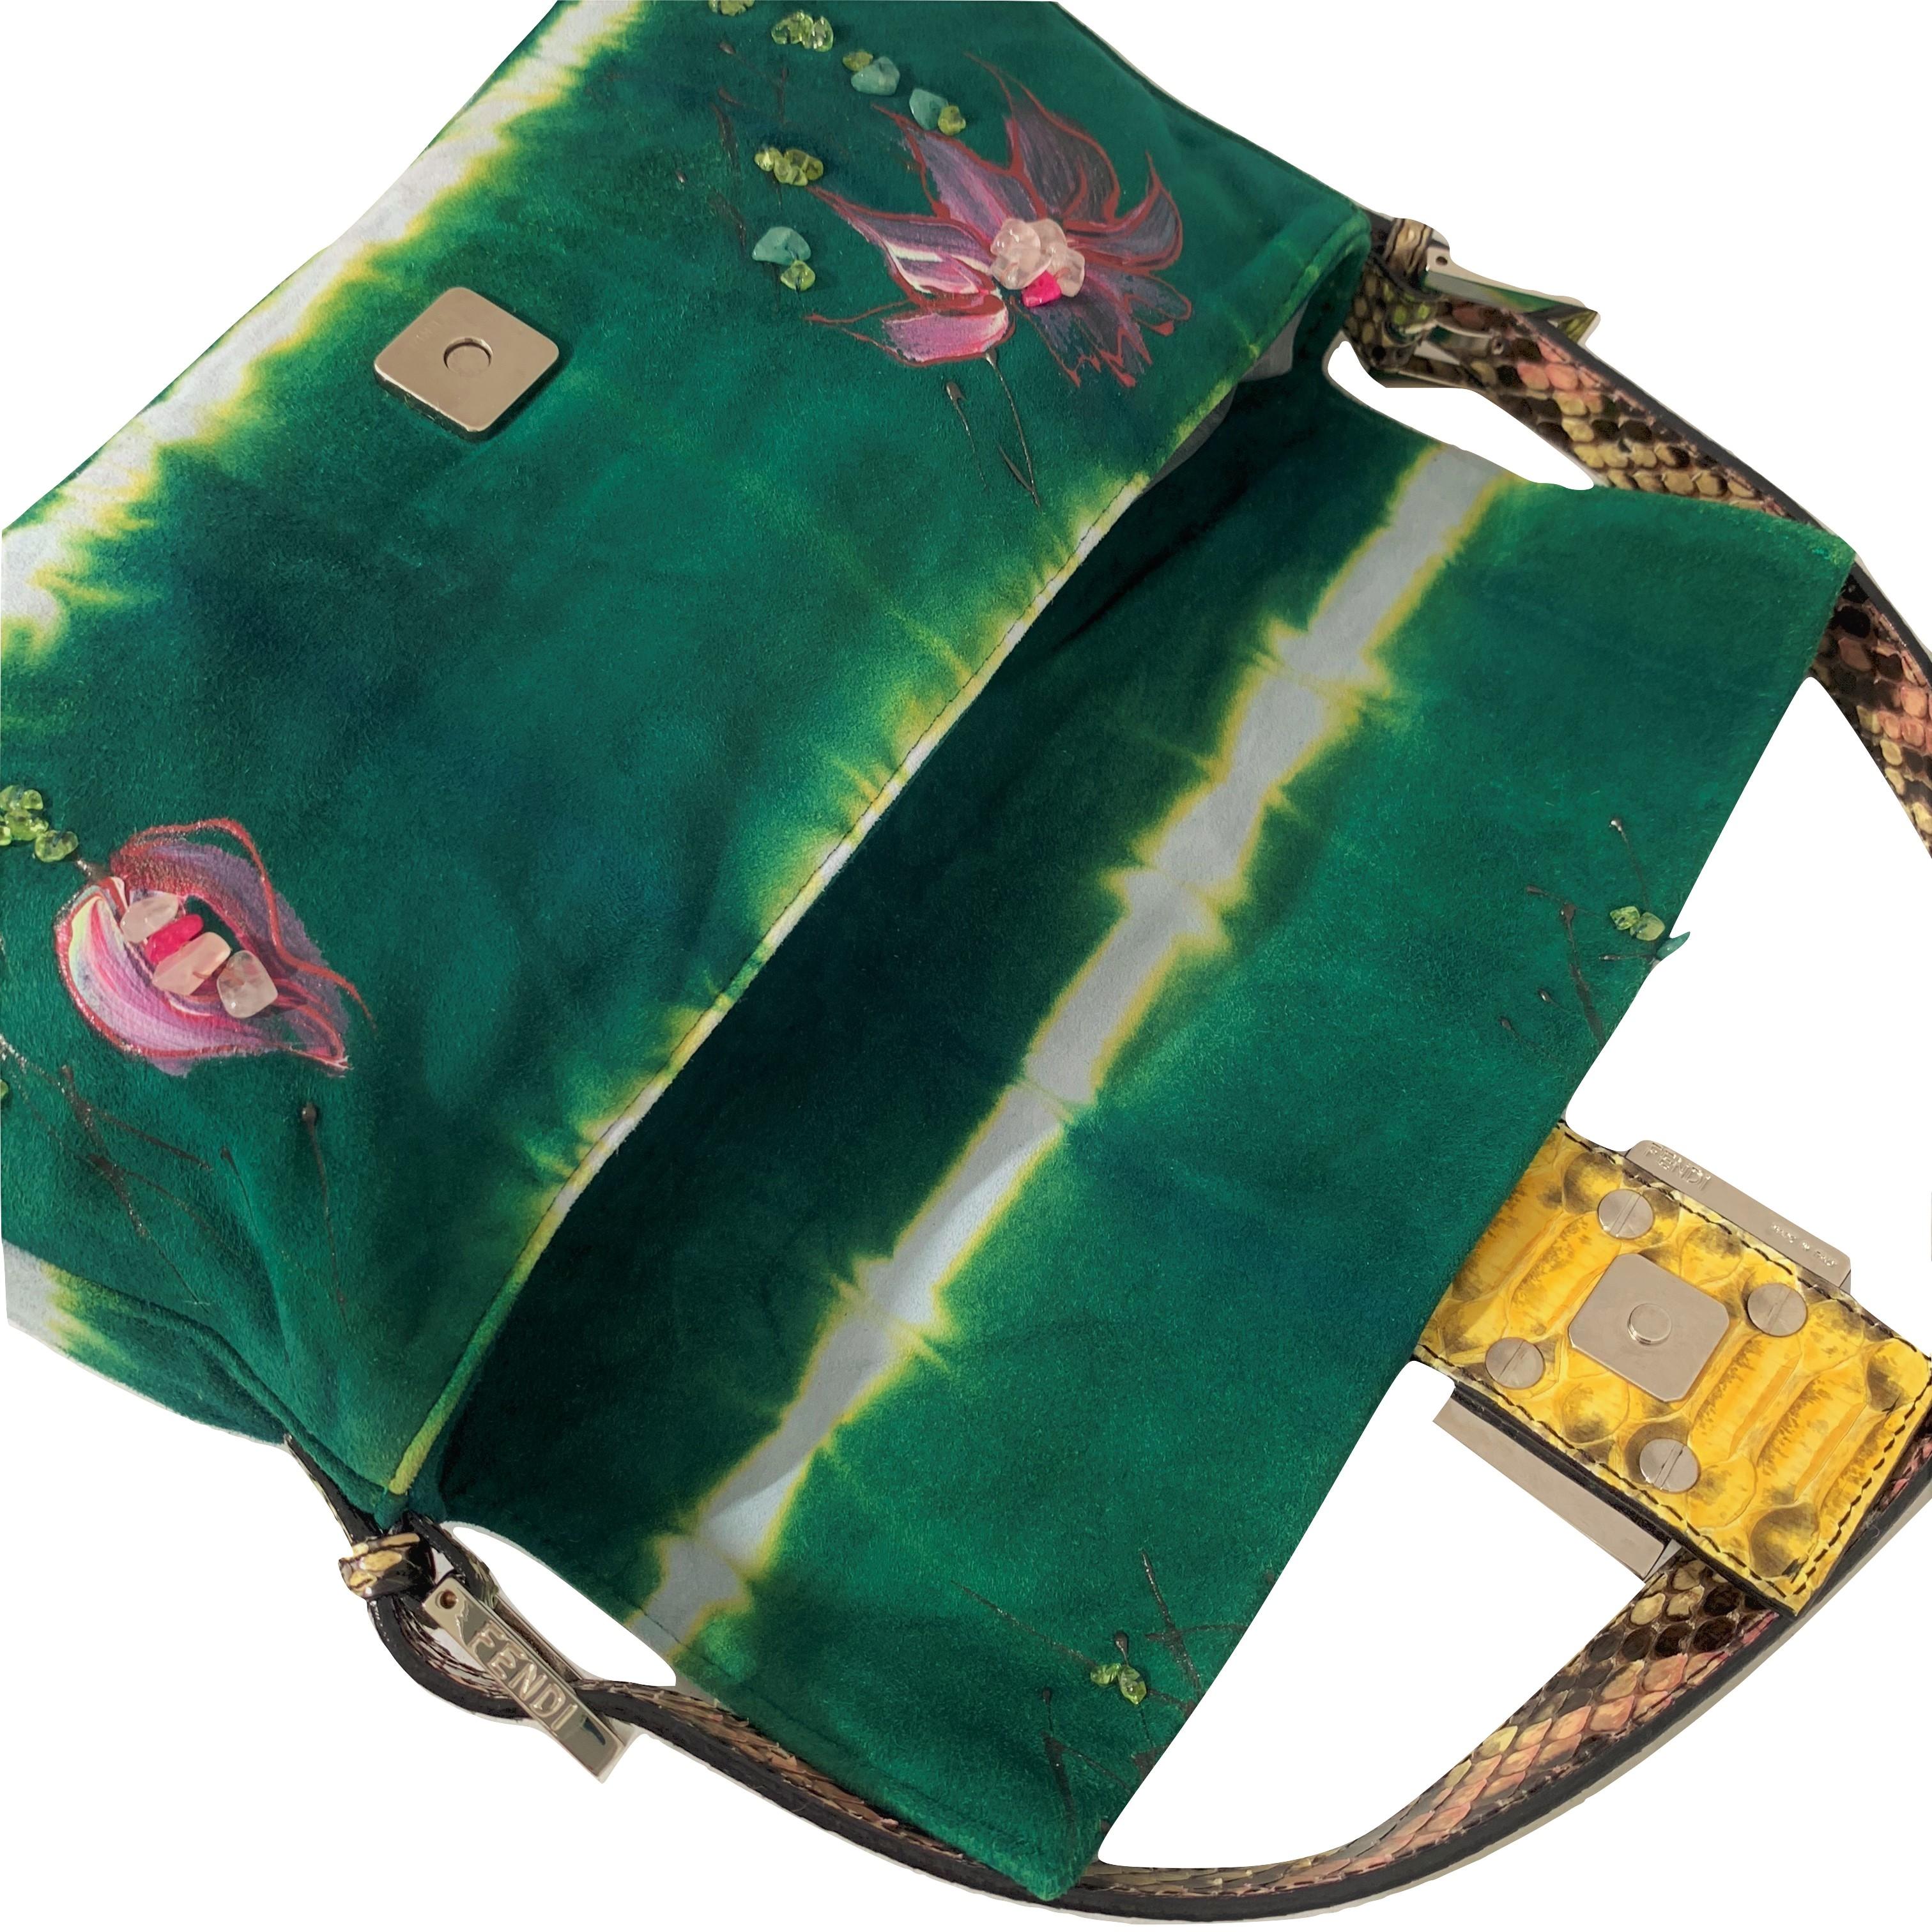 New Fendi Hand Painted Python Bag Featured in the 15th Anniversary Baguette Book 8